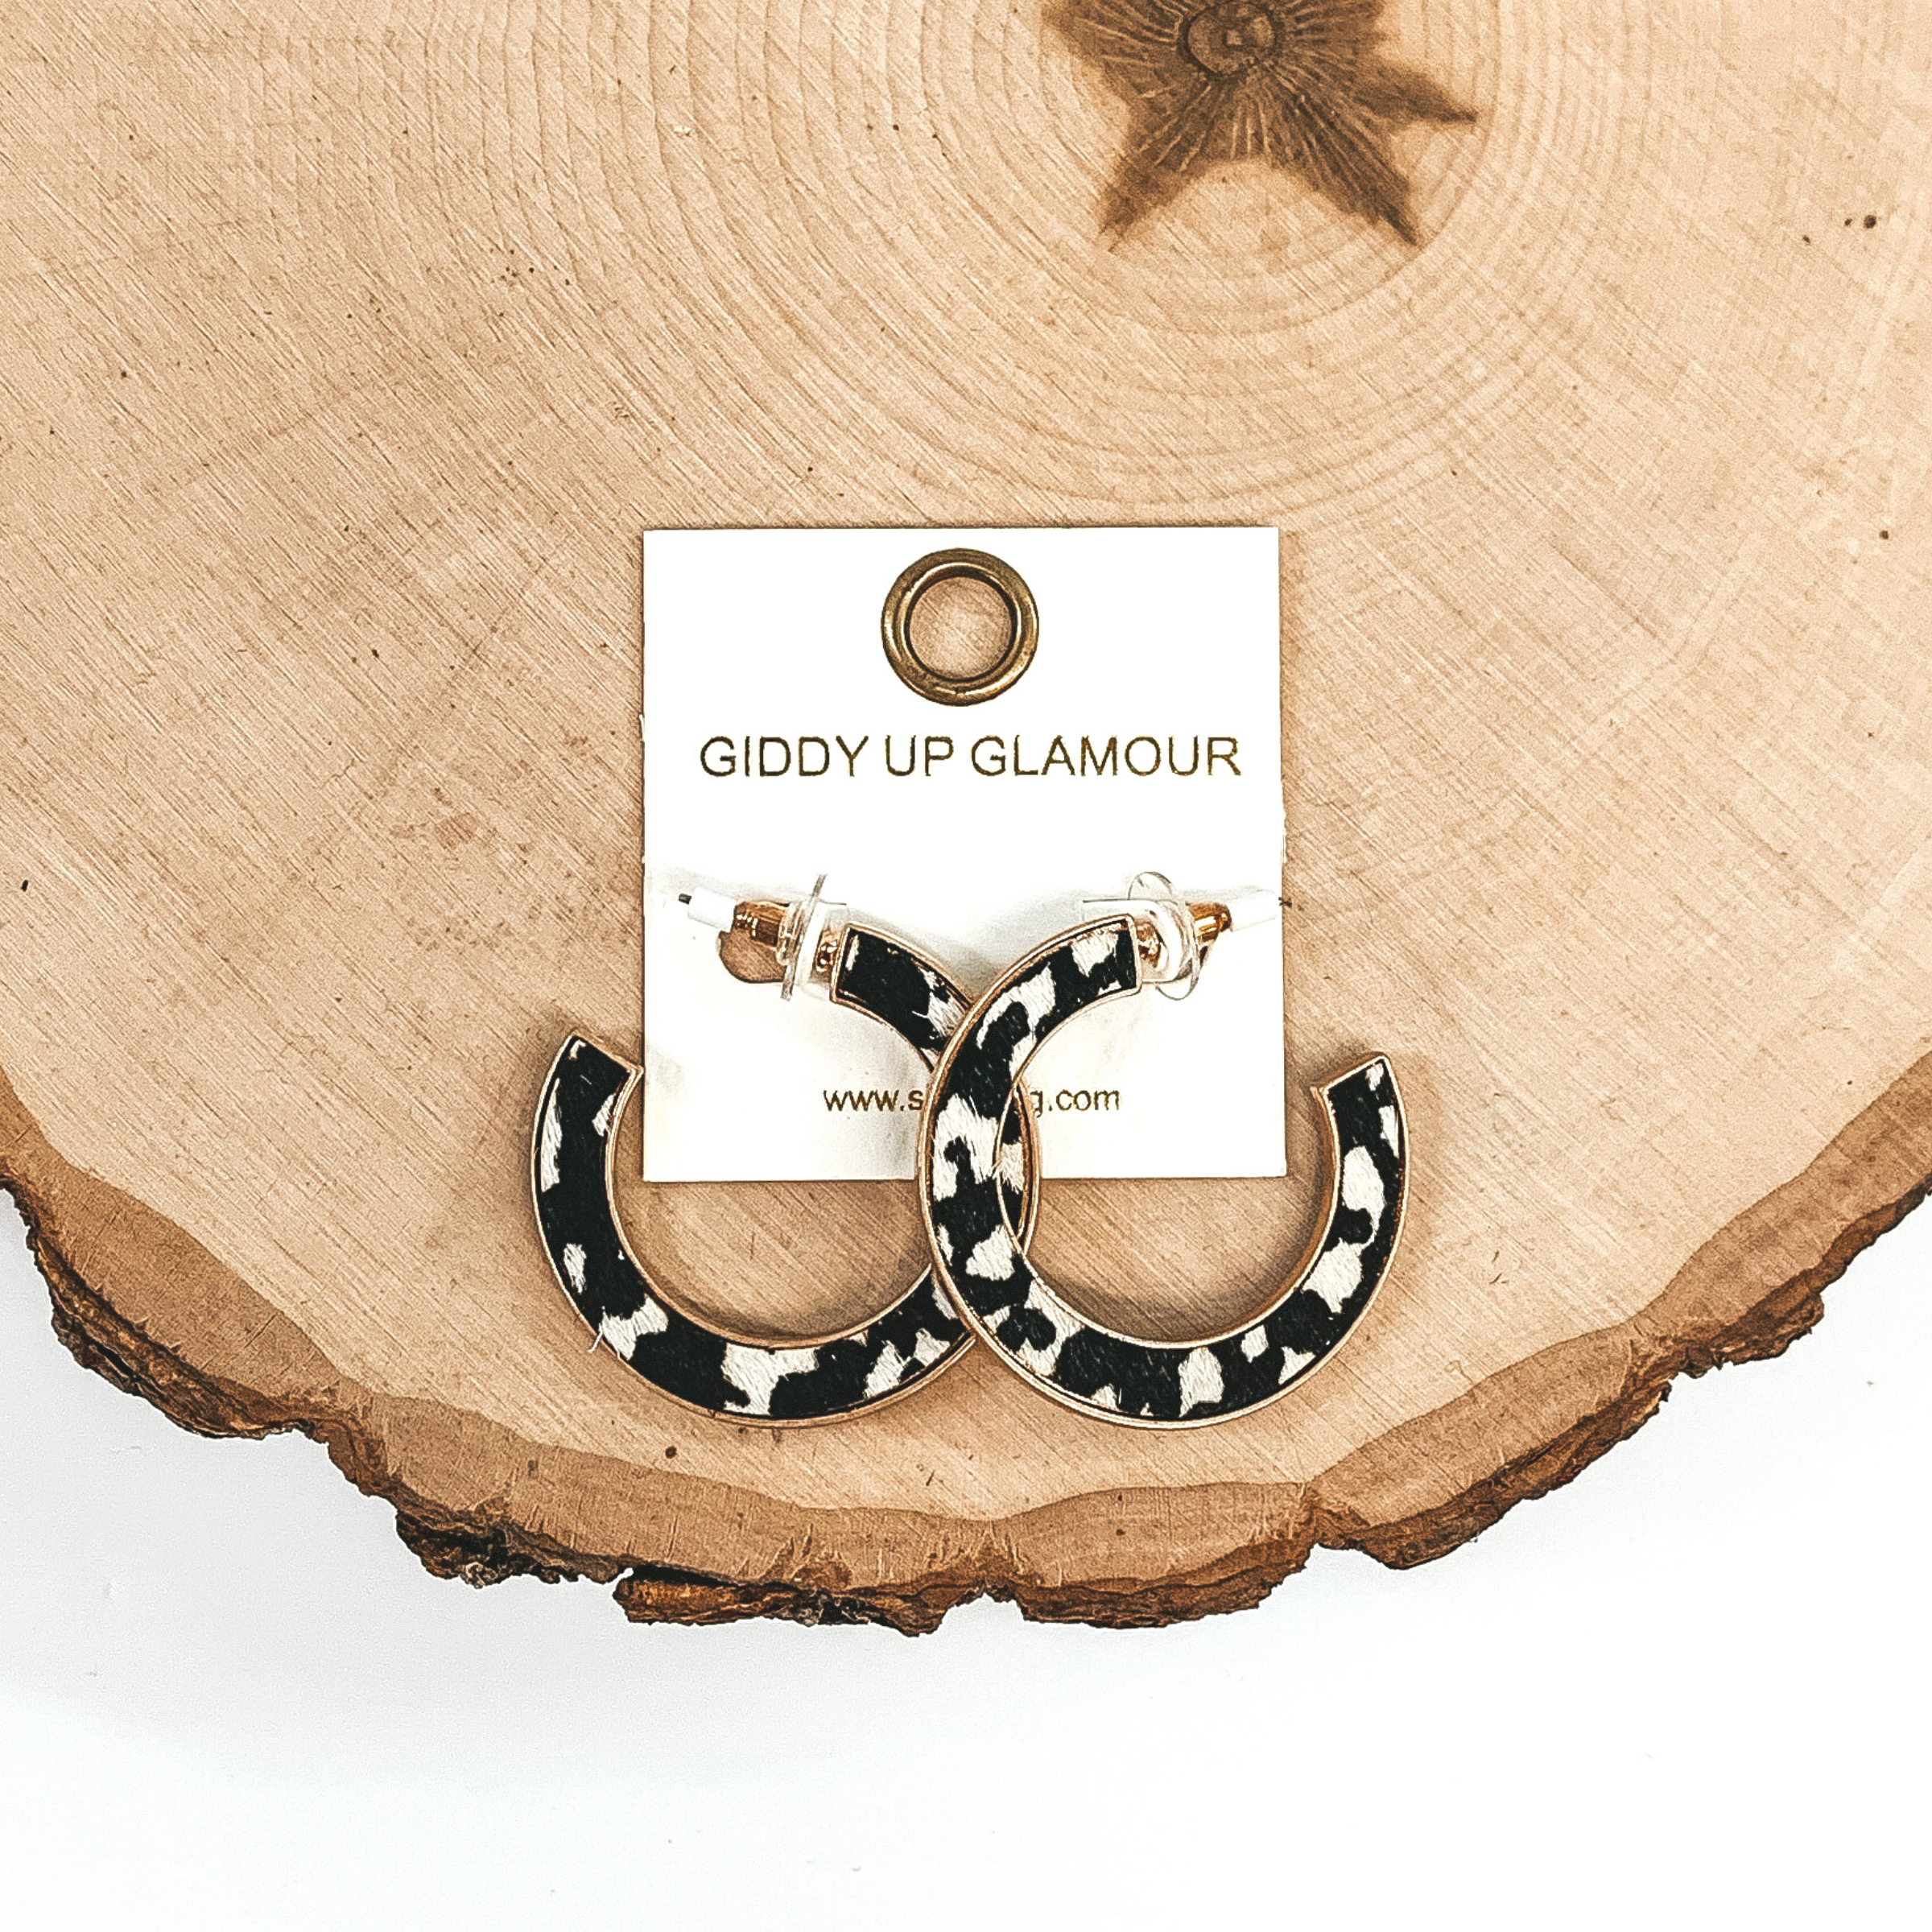 Gold hoops with black and white animal print inlay. These earrings are pictured laying on a piece of wood on a white background.